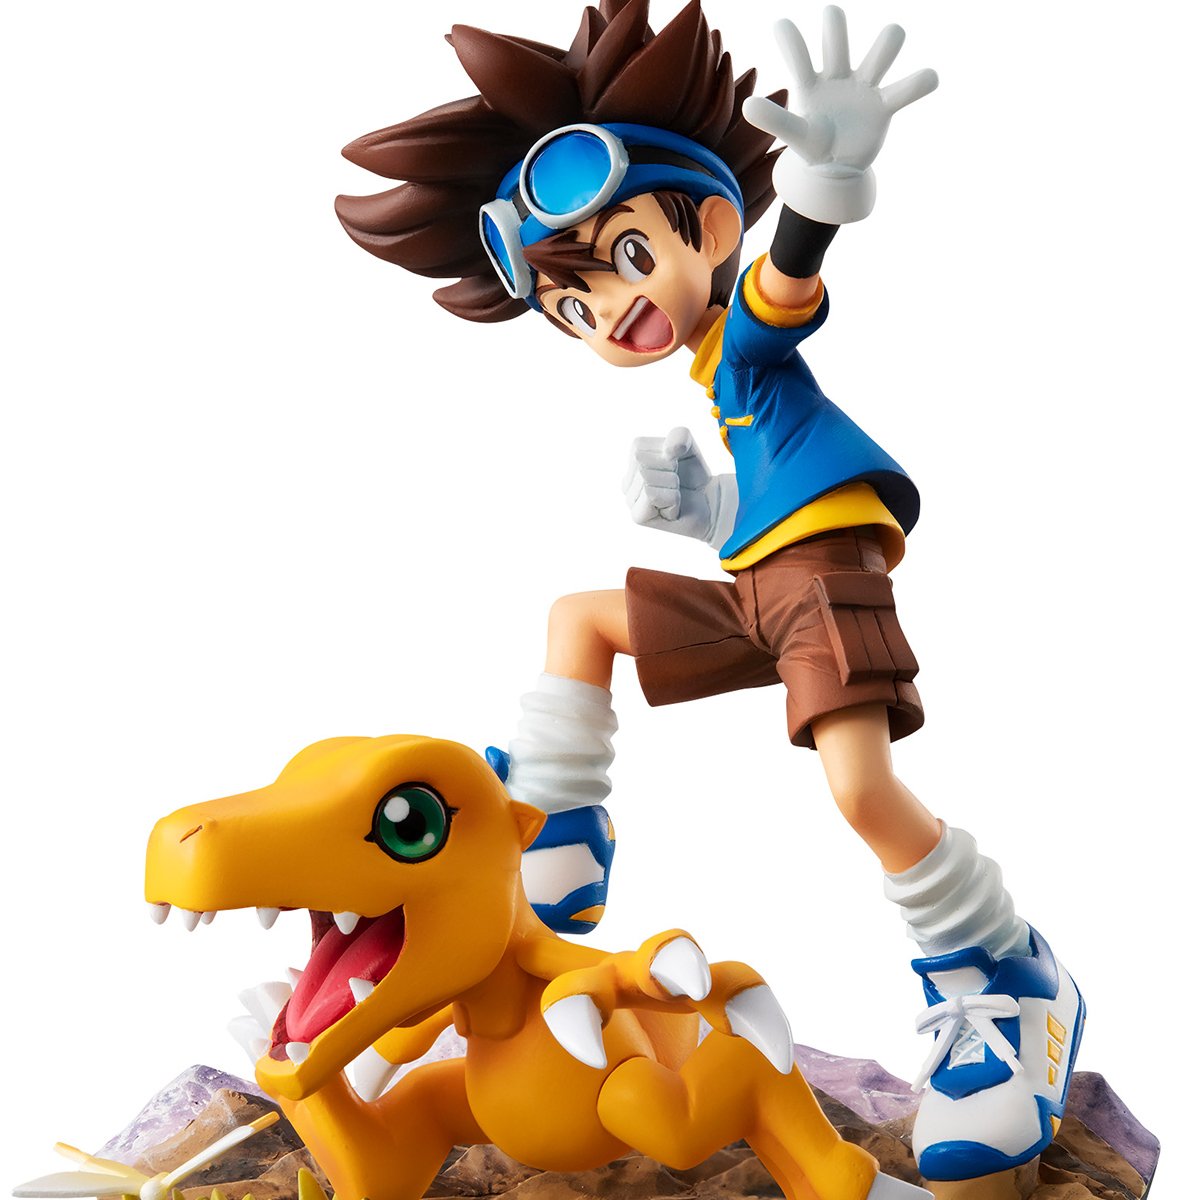 Digimon Adventure GEM Series &quot;Taichi Yagami &amp; Agumon 20th Anniversary&quot;-MegaHouse-Ace Cards &amp; Collectibles